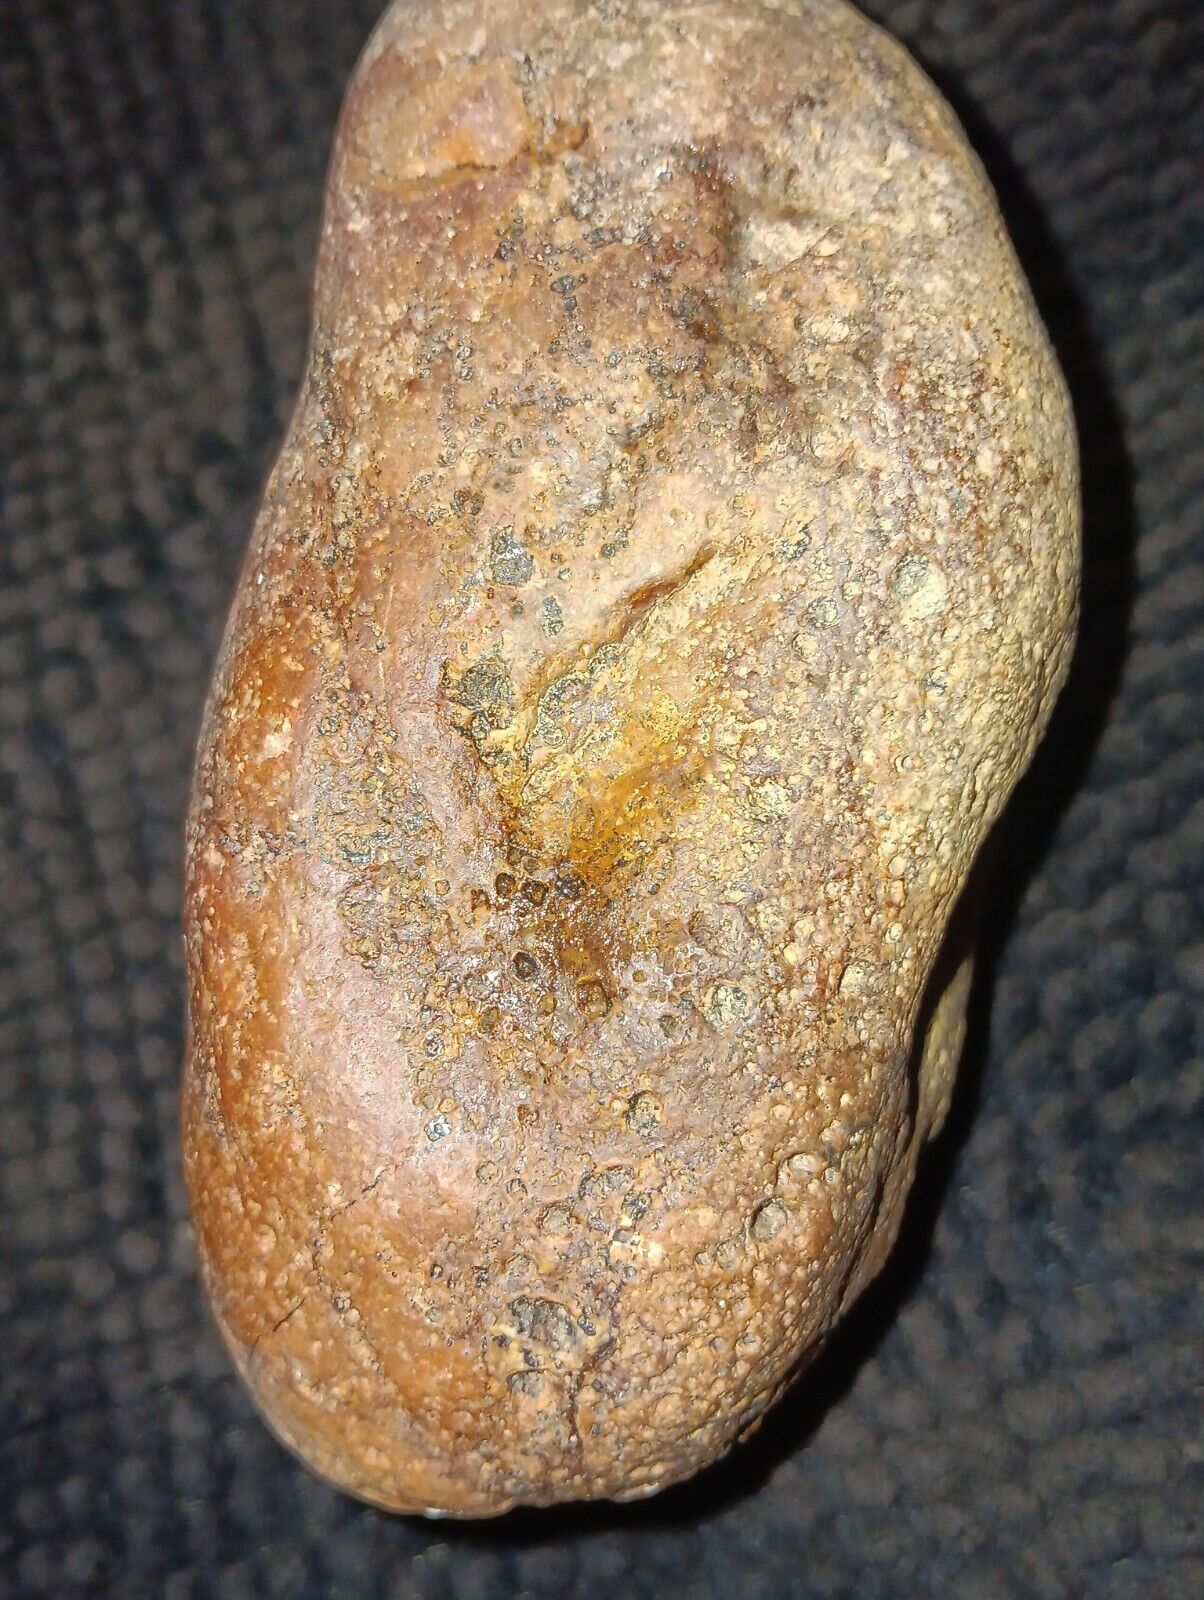 Rare Unknown Orange Rock With Little Holes And Sparkles Like Gold R6#8i